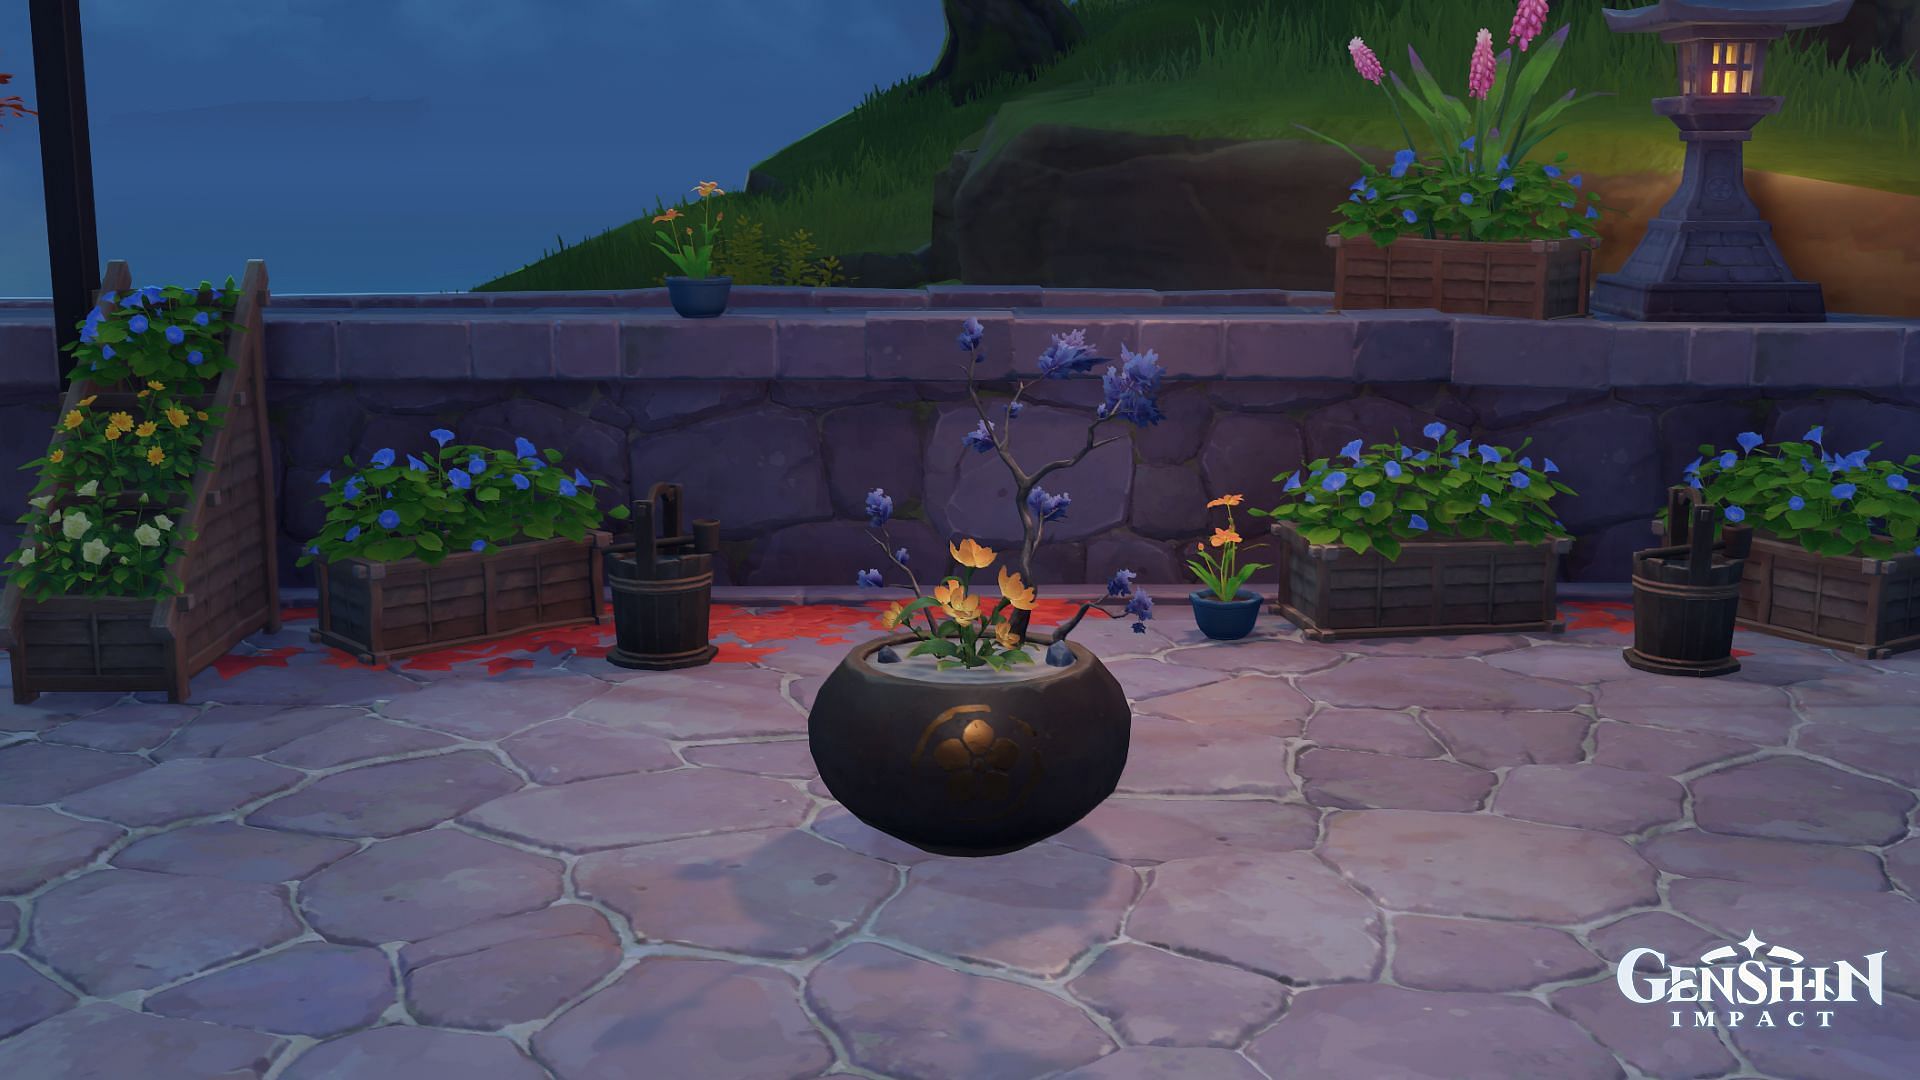 Genshin Impact Floral Courtyard guide (Day 1): How to construct